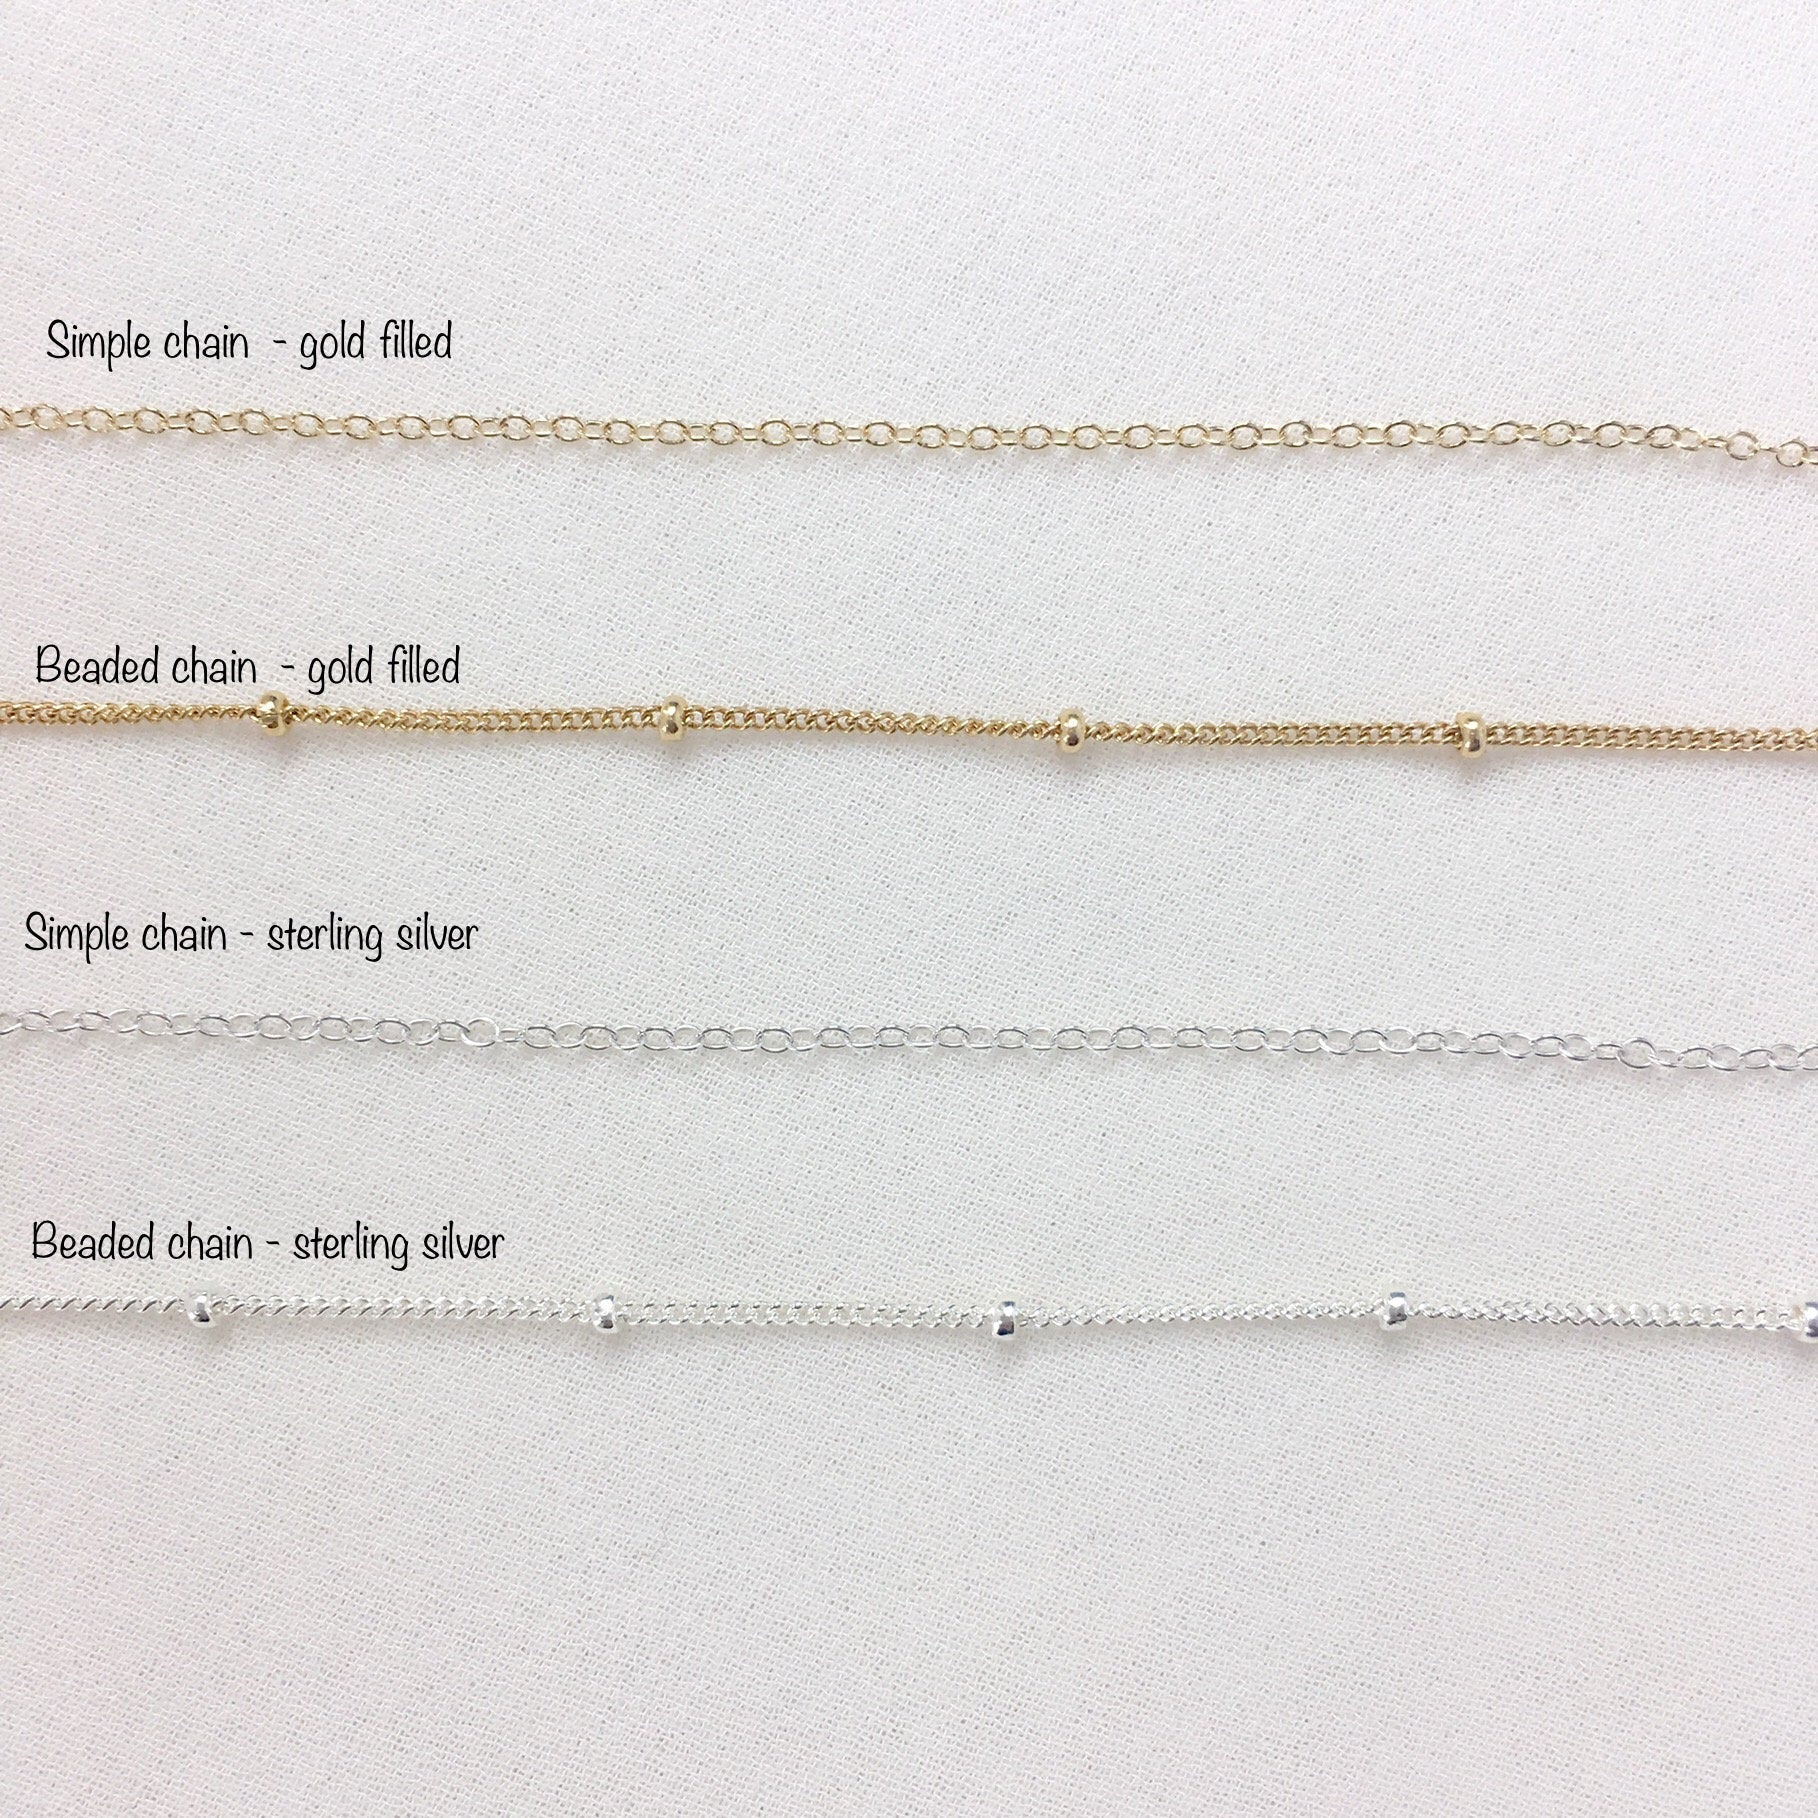 North Star Necklace - gold filled star necklace, gold star necklace, rectangle necklace, dainty necklaces, square necklace |GFN00036